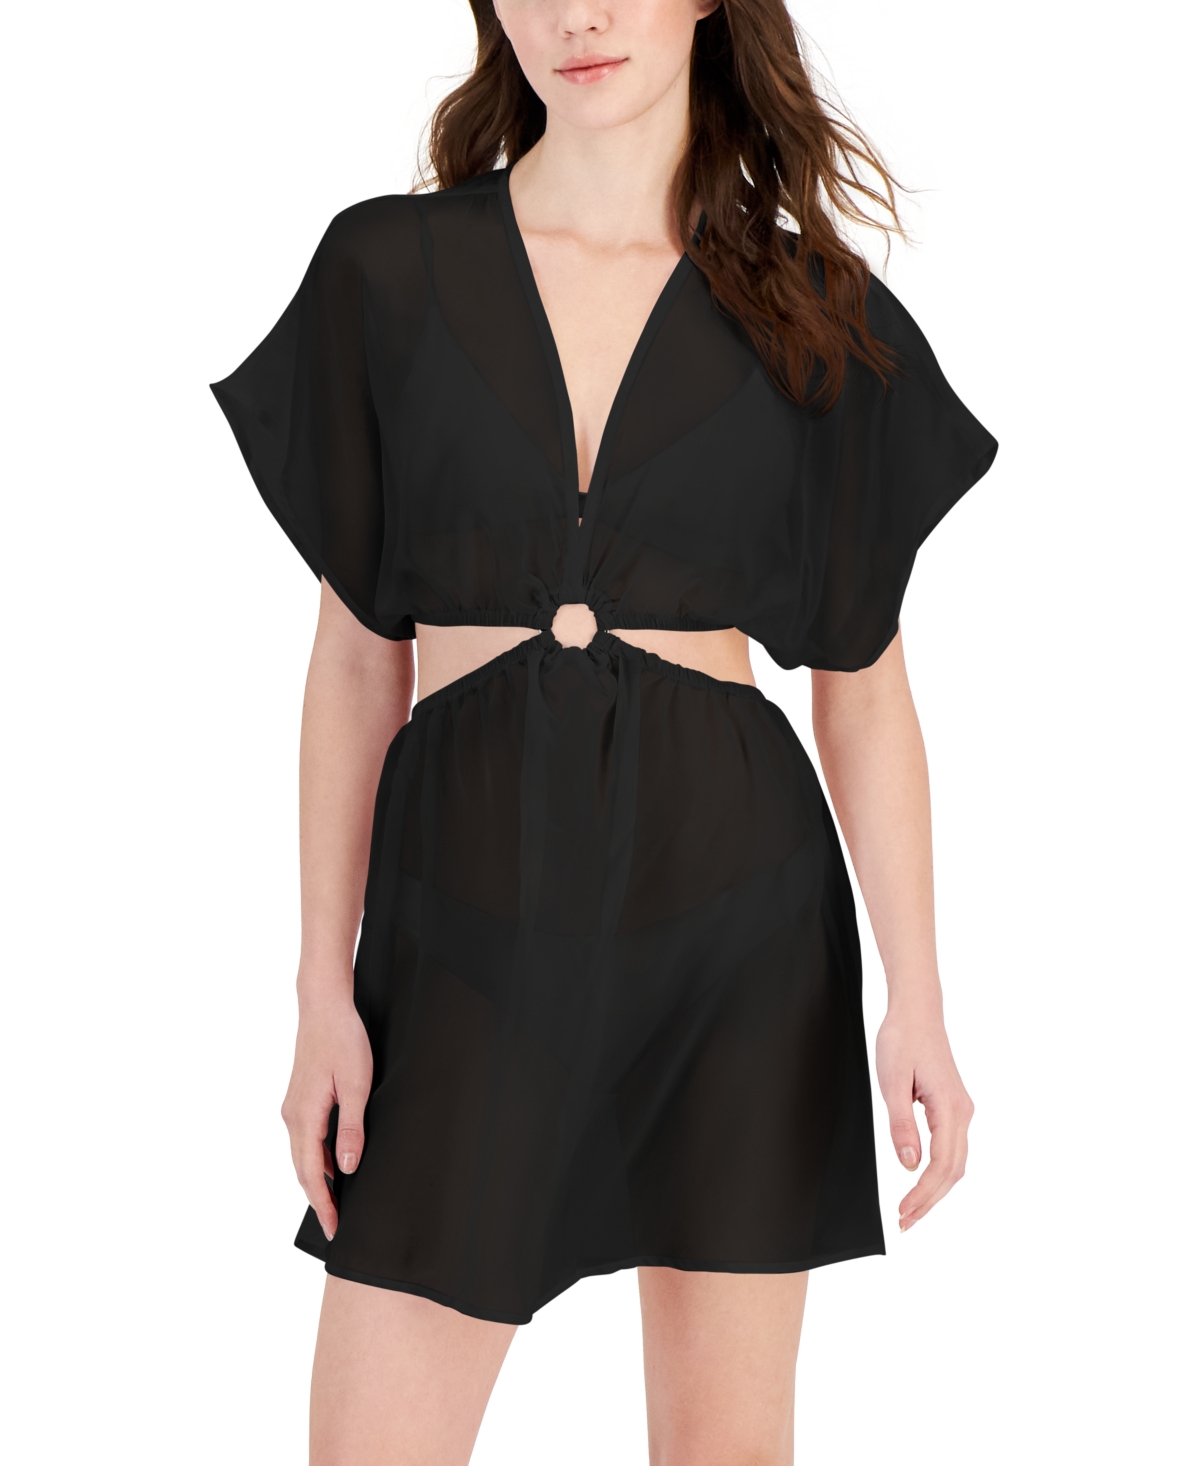 Women's Cut-Out Dolman Sleeve Cover-Up, Created for Macy's - Black